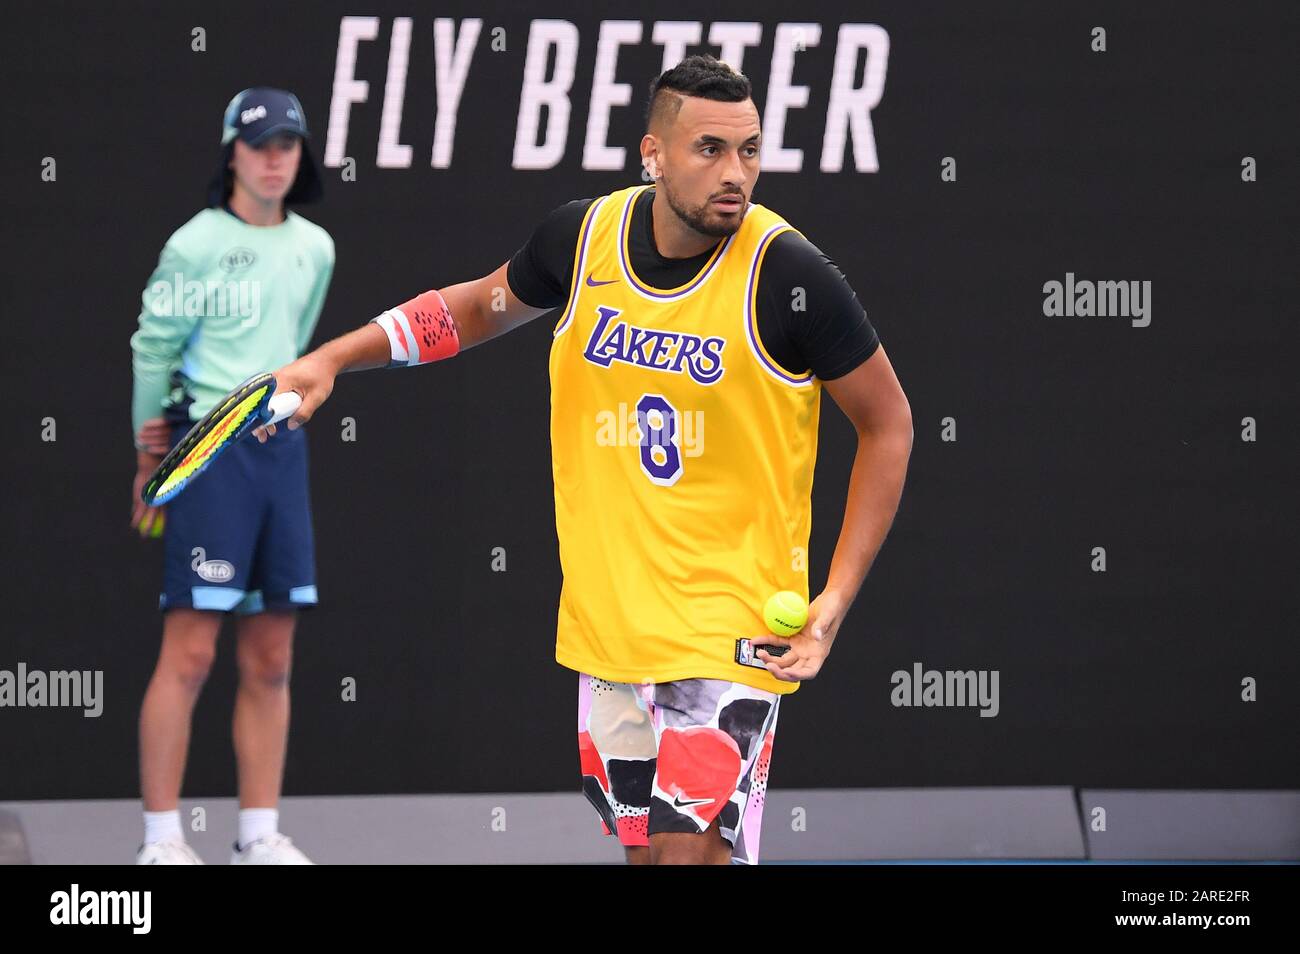 Melbourne, Australia. 27th Jan, 2020. Melbourne Park Australian Open Day 8 27/01/20 Nick Kyrgios (AUS) Rafa Nadal (ESP) fourth round match Kyrgios arrives on court wearing an LA Lakers shirt in respect of hoops legend Kobe Bryant who died today in a helicopter crash. Credit: Roger Parker/Alamy Live News Stock Photo